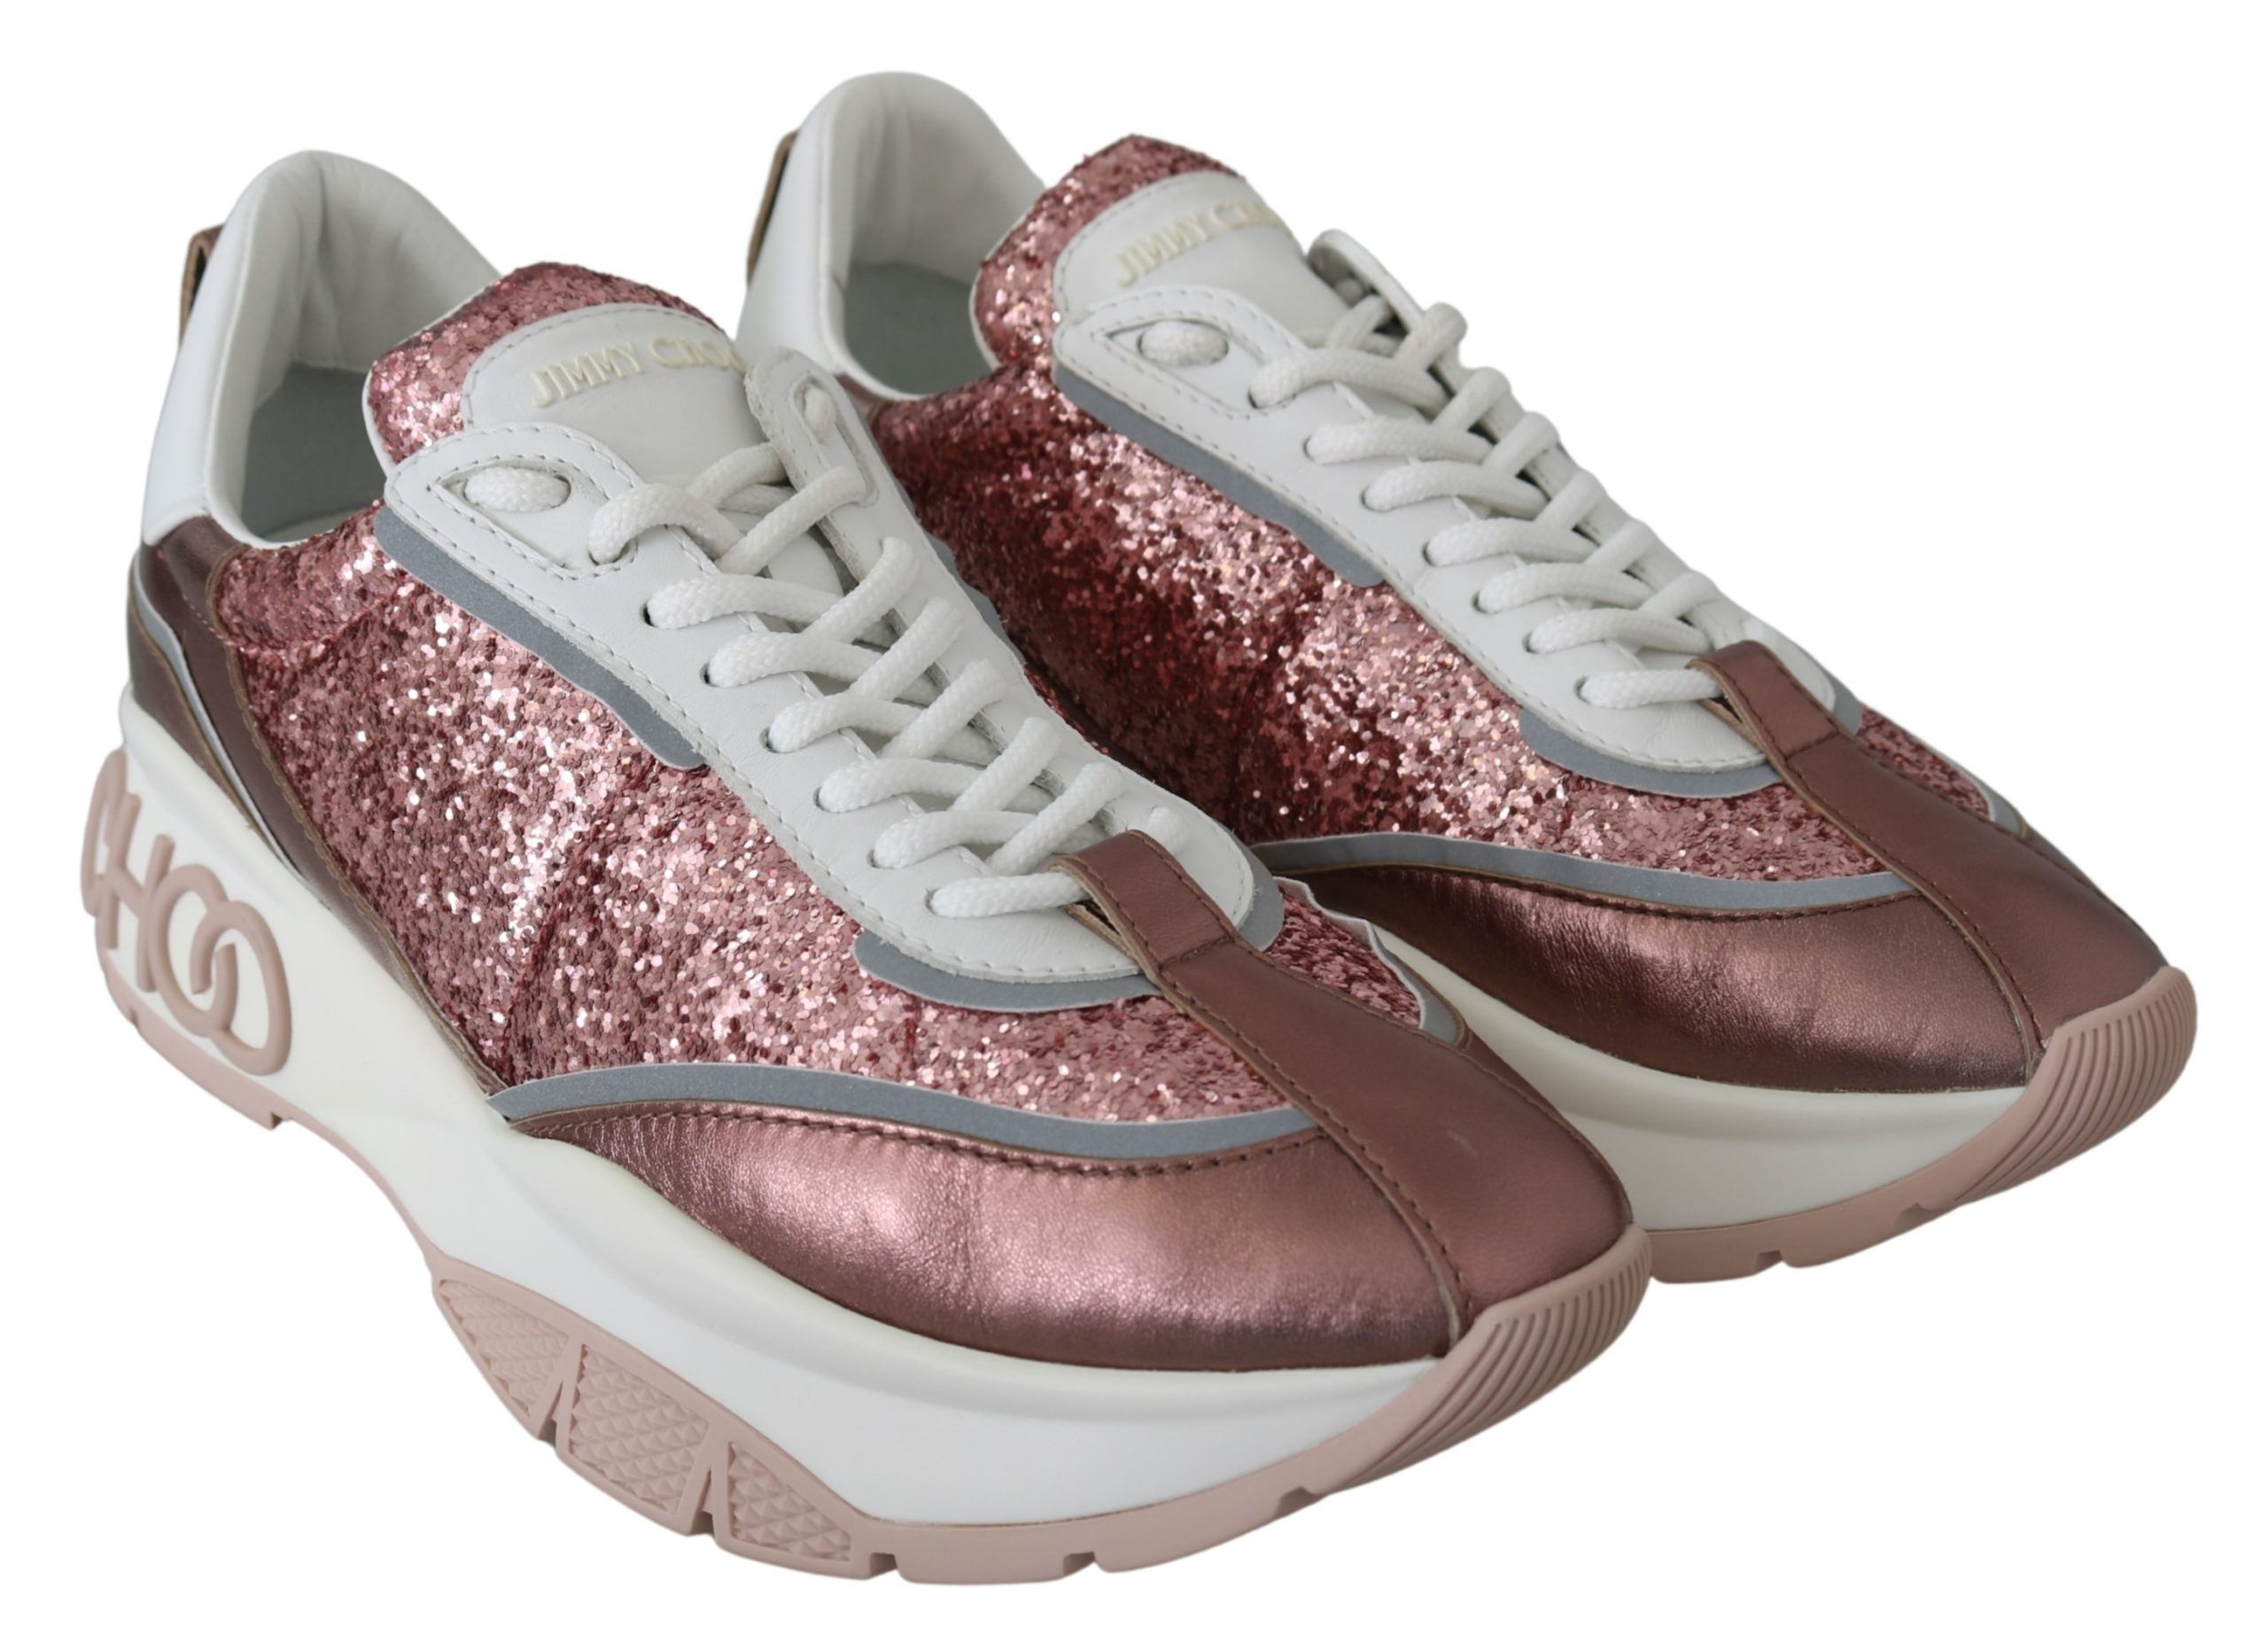 Jimmy Choo Pink Candyfloss Leather Raine Sneakers • Fashion Brands